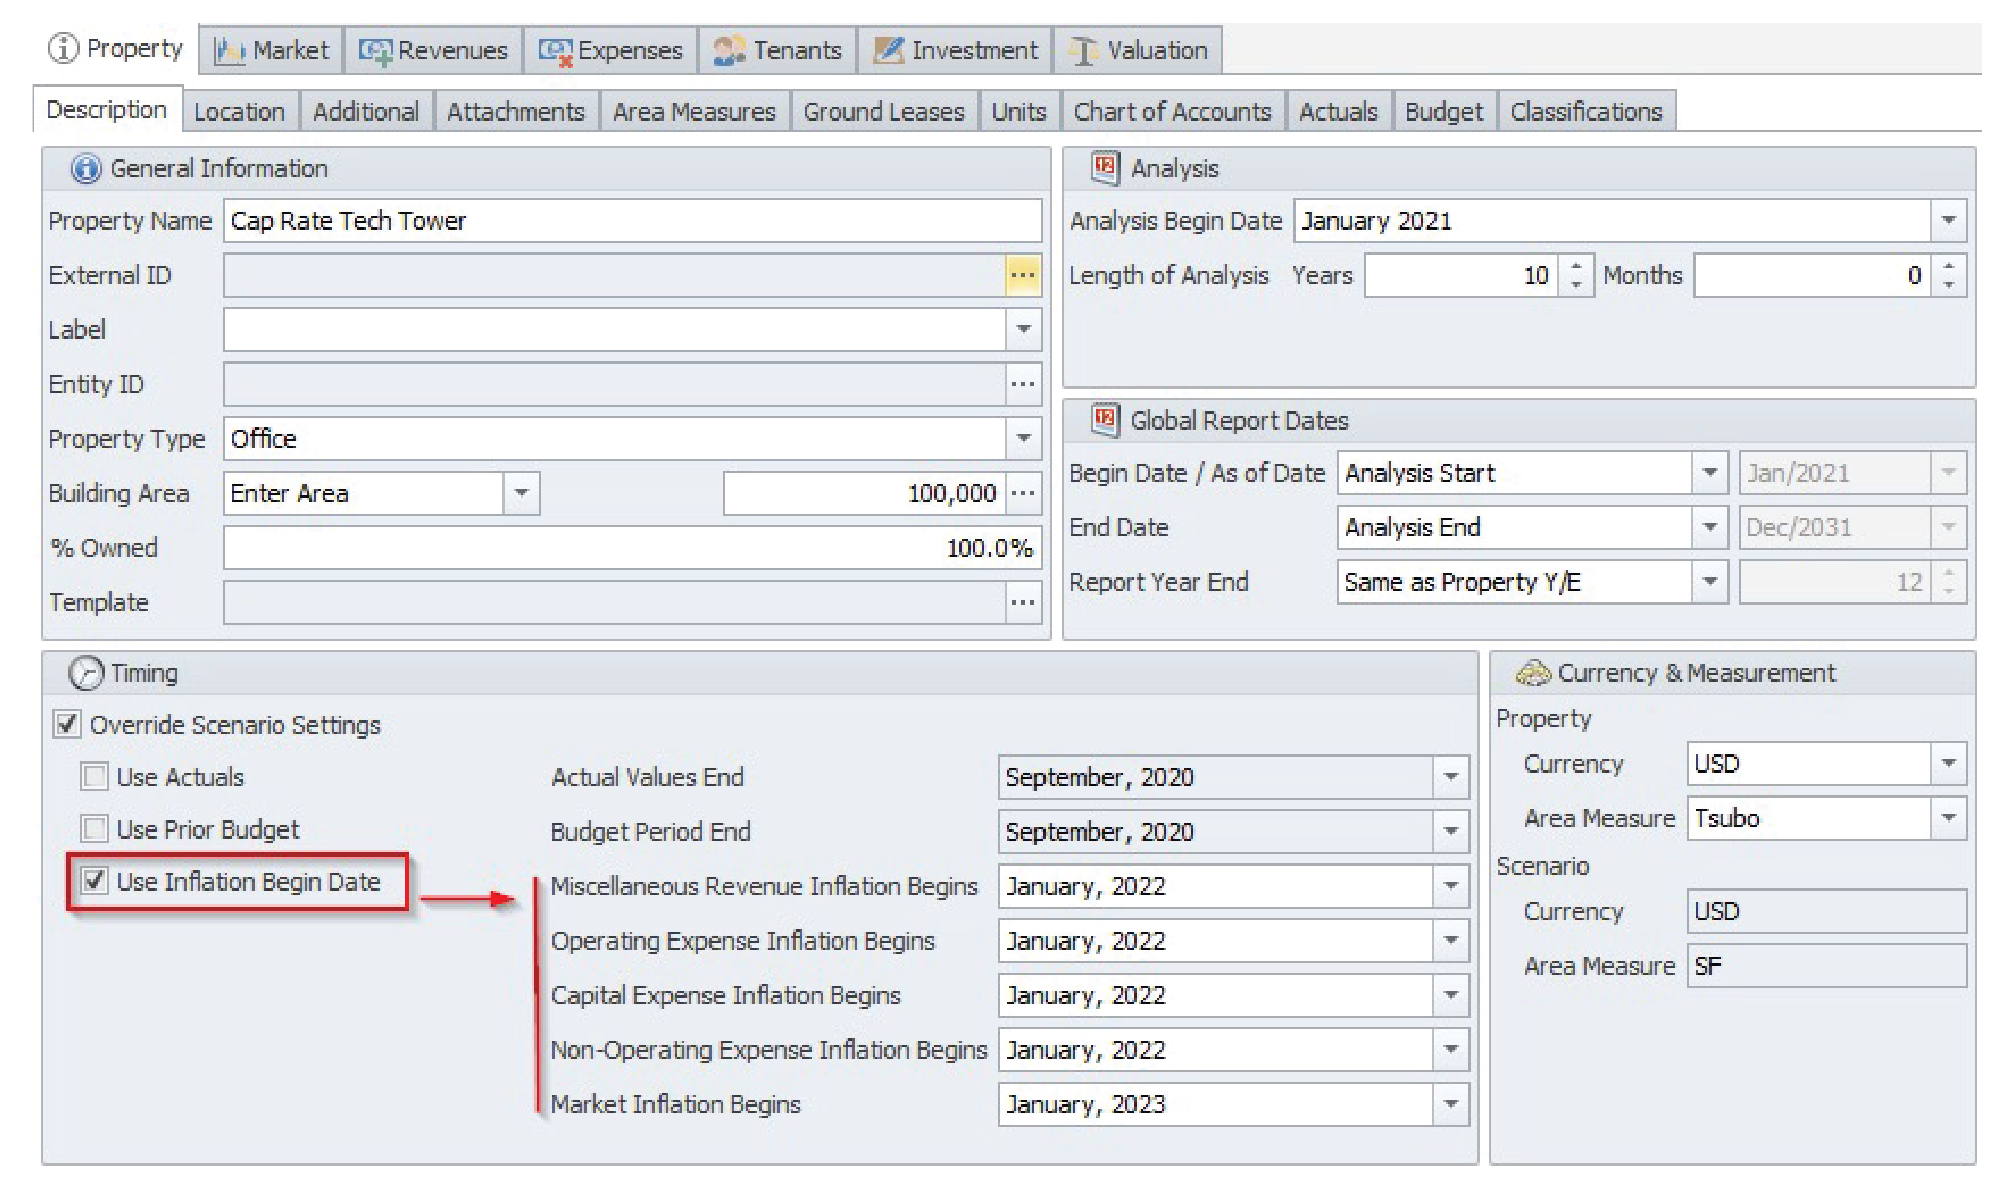 Screen shot showing the Description tab within the Property section in Argus Enterprise software.